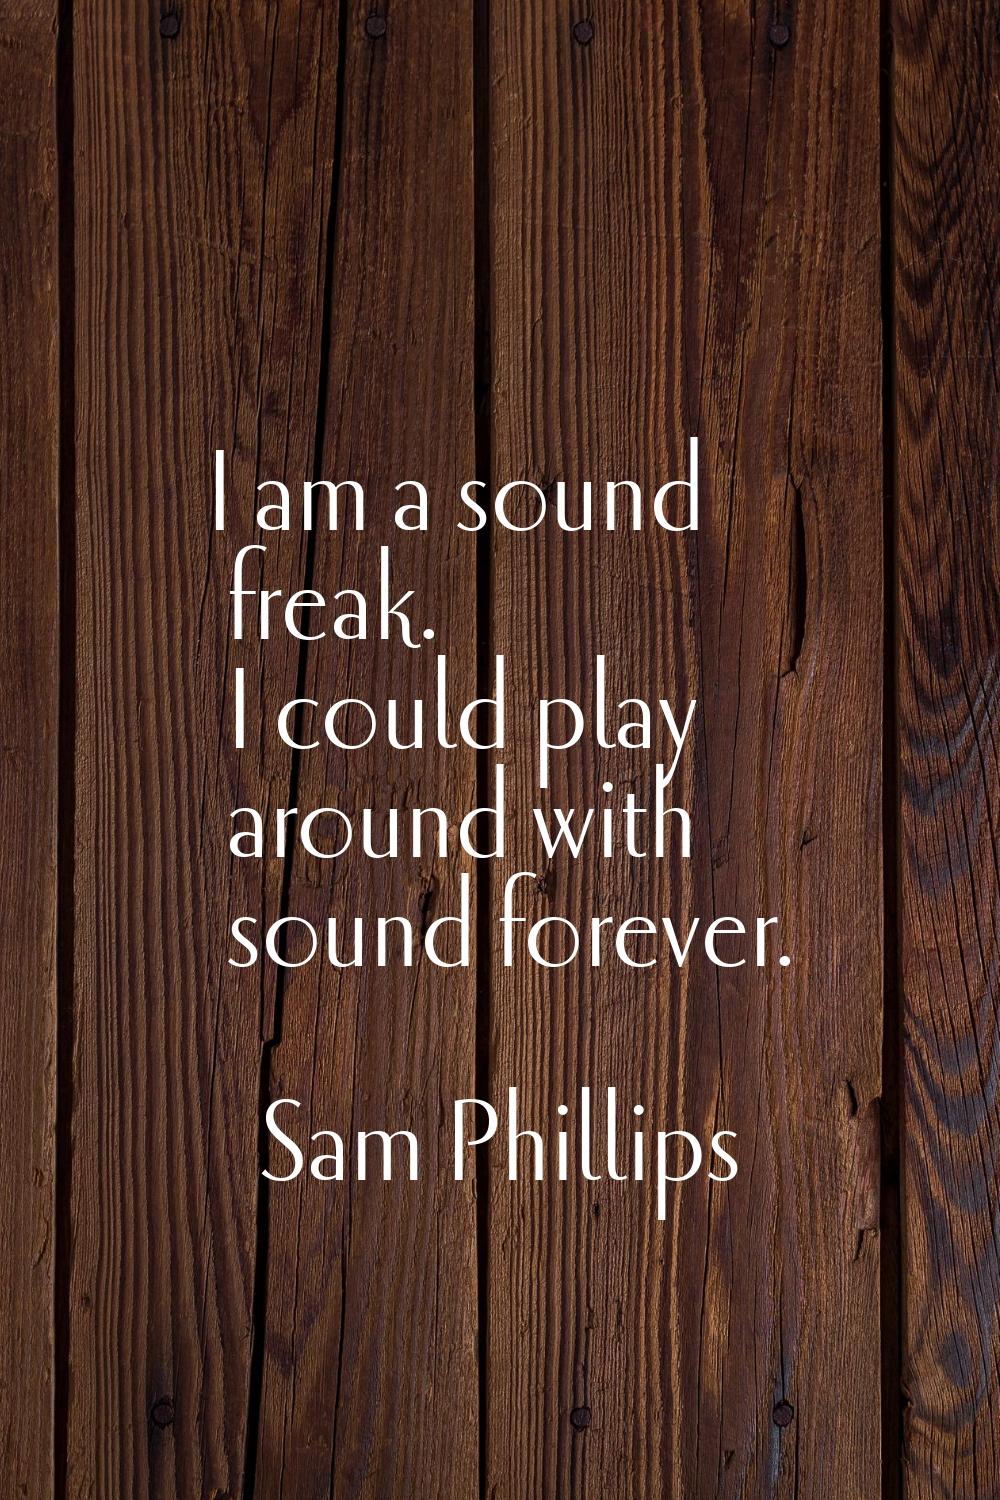 I am a sound freak. I could play around with sound forever.